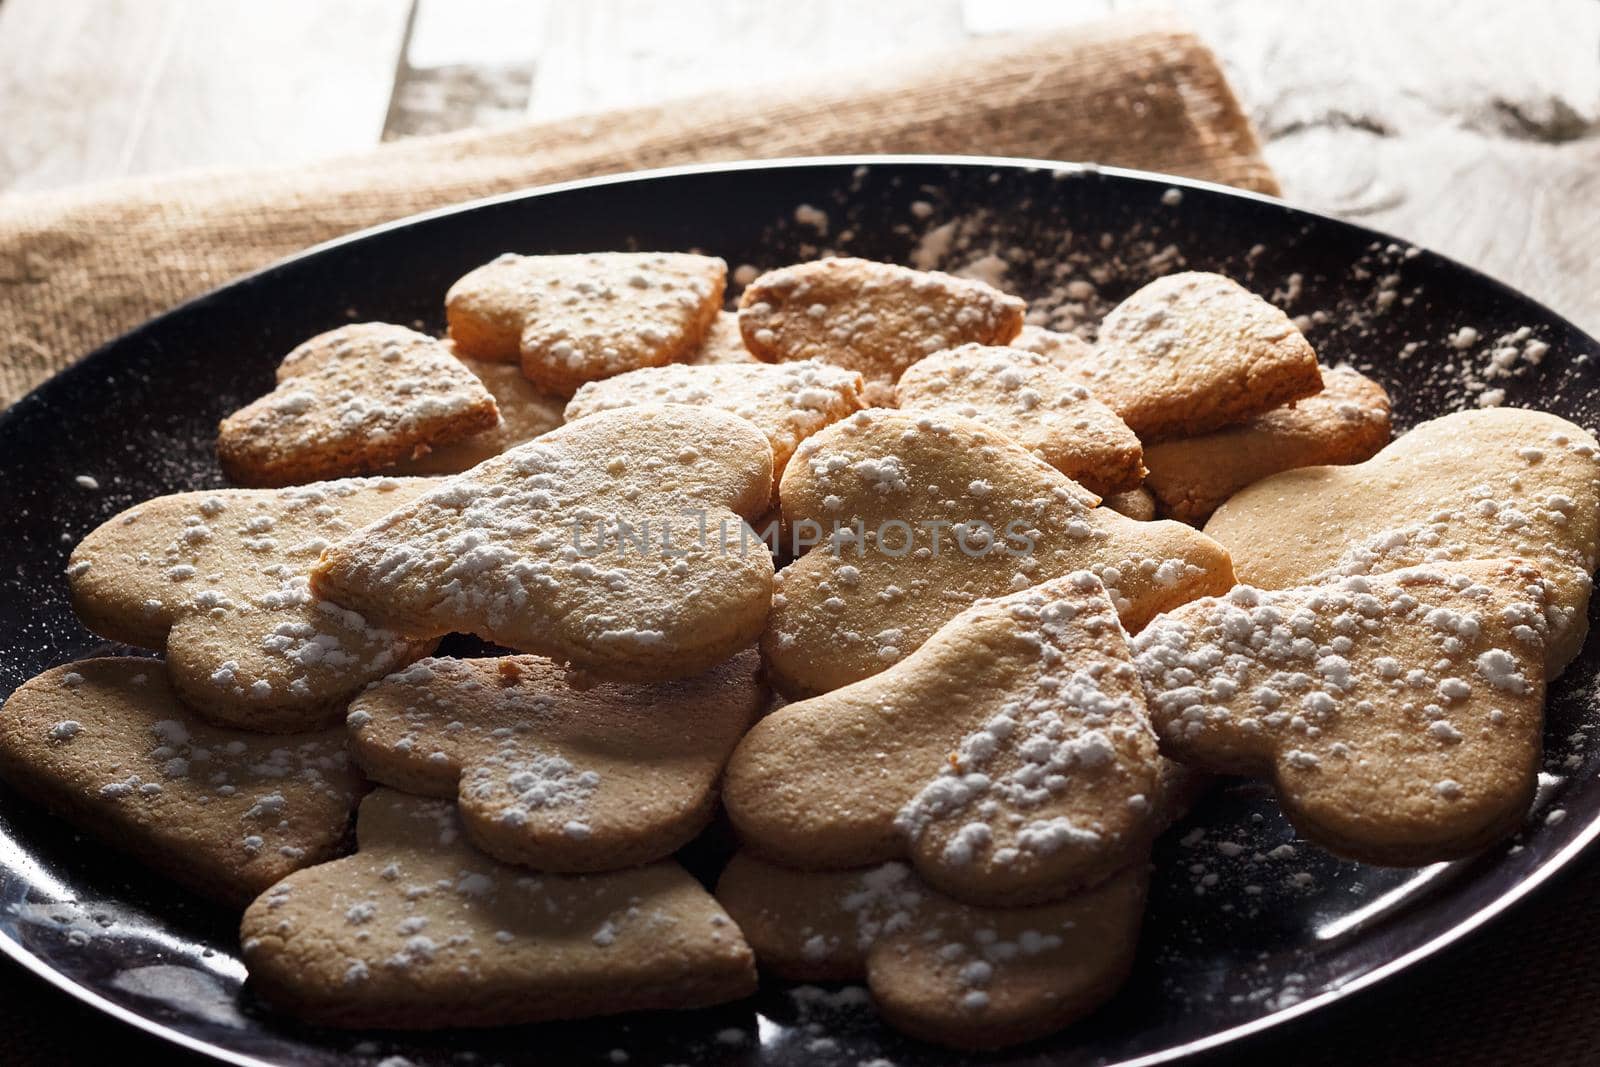 Delicious home-made heart-shaped cookies sprinkled with icing sugar on sackcloth and wooden boards. Horizontal image seen against backlight.